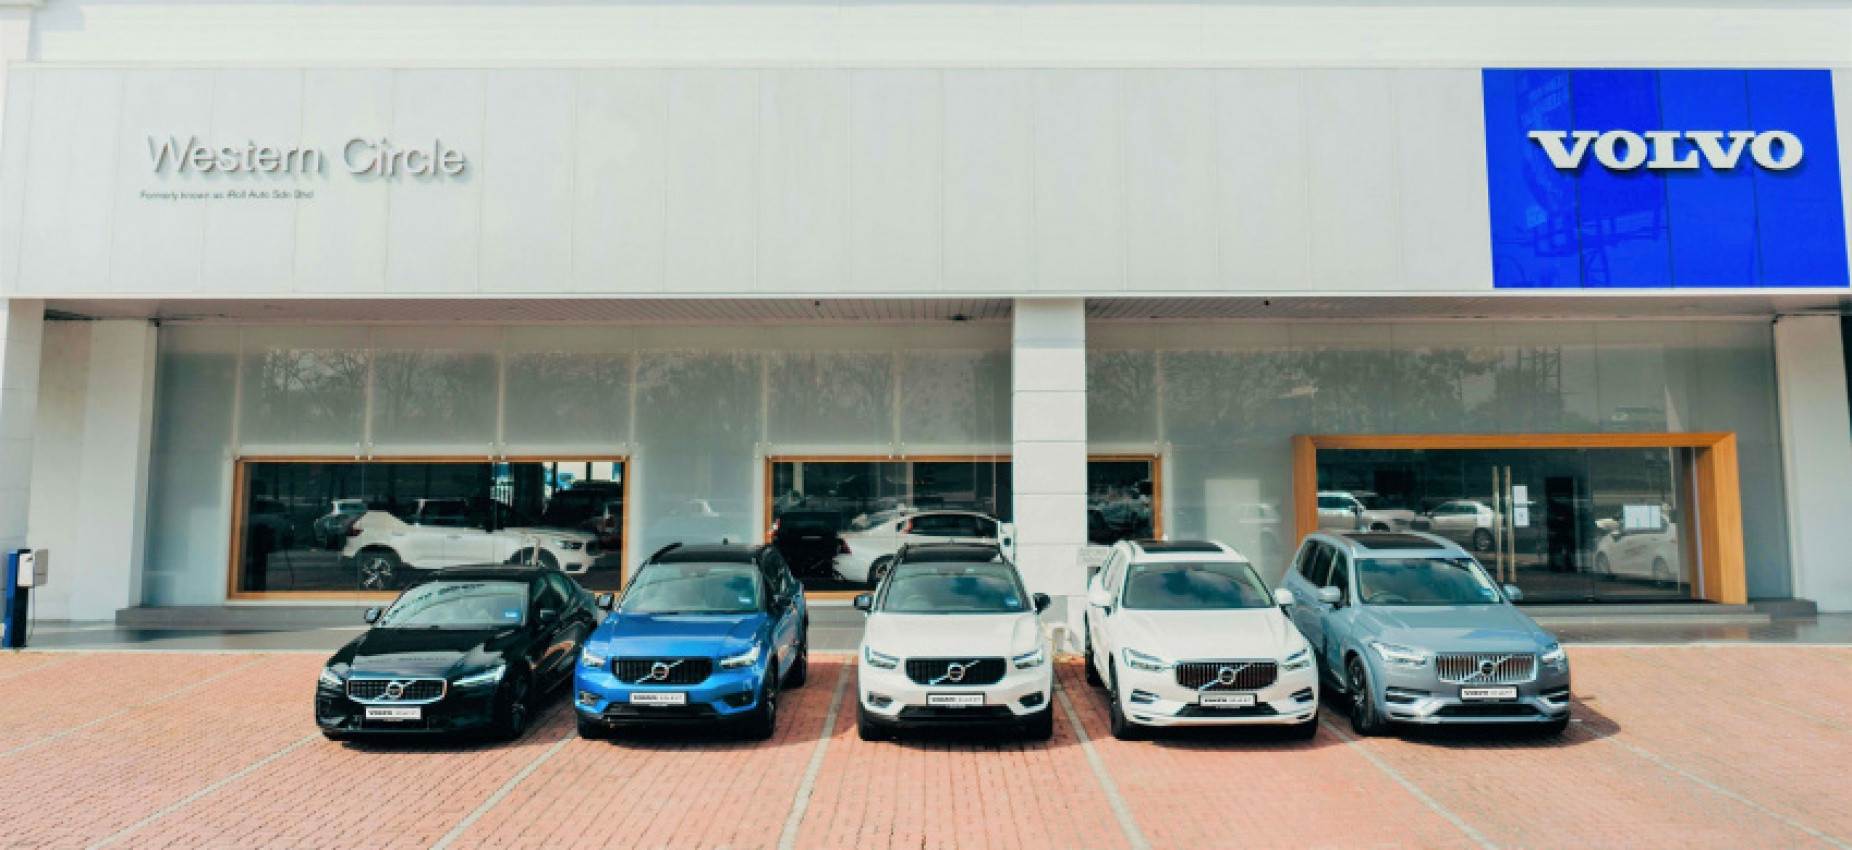 autos, car brands, cars, volvo, automotive, cars, malaysia, penang, pre-owned, used cars, volvo car malaysia, volvo cars, volvo selekt, western circle (pg) sdn bhd, volvo selekt pre-owned cars now available in penang